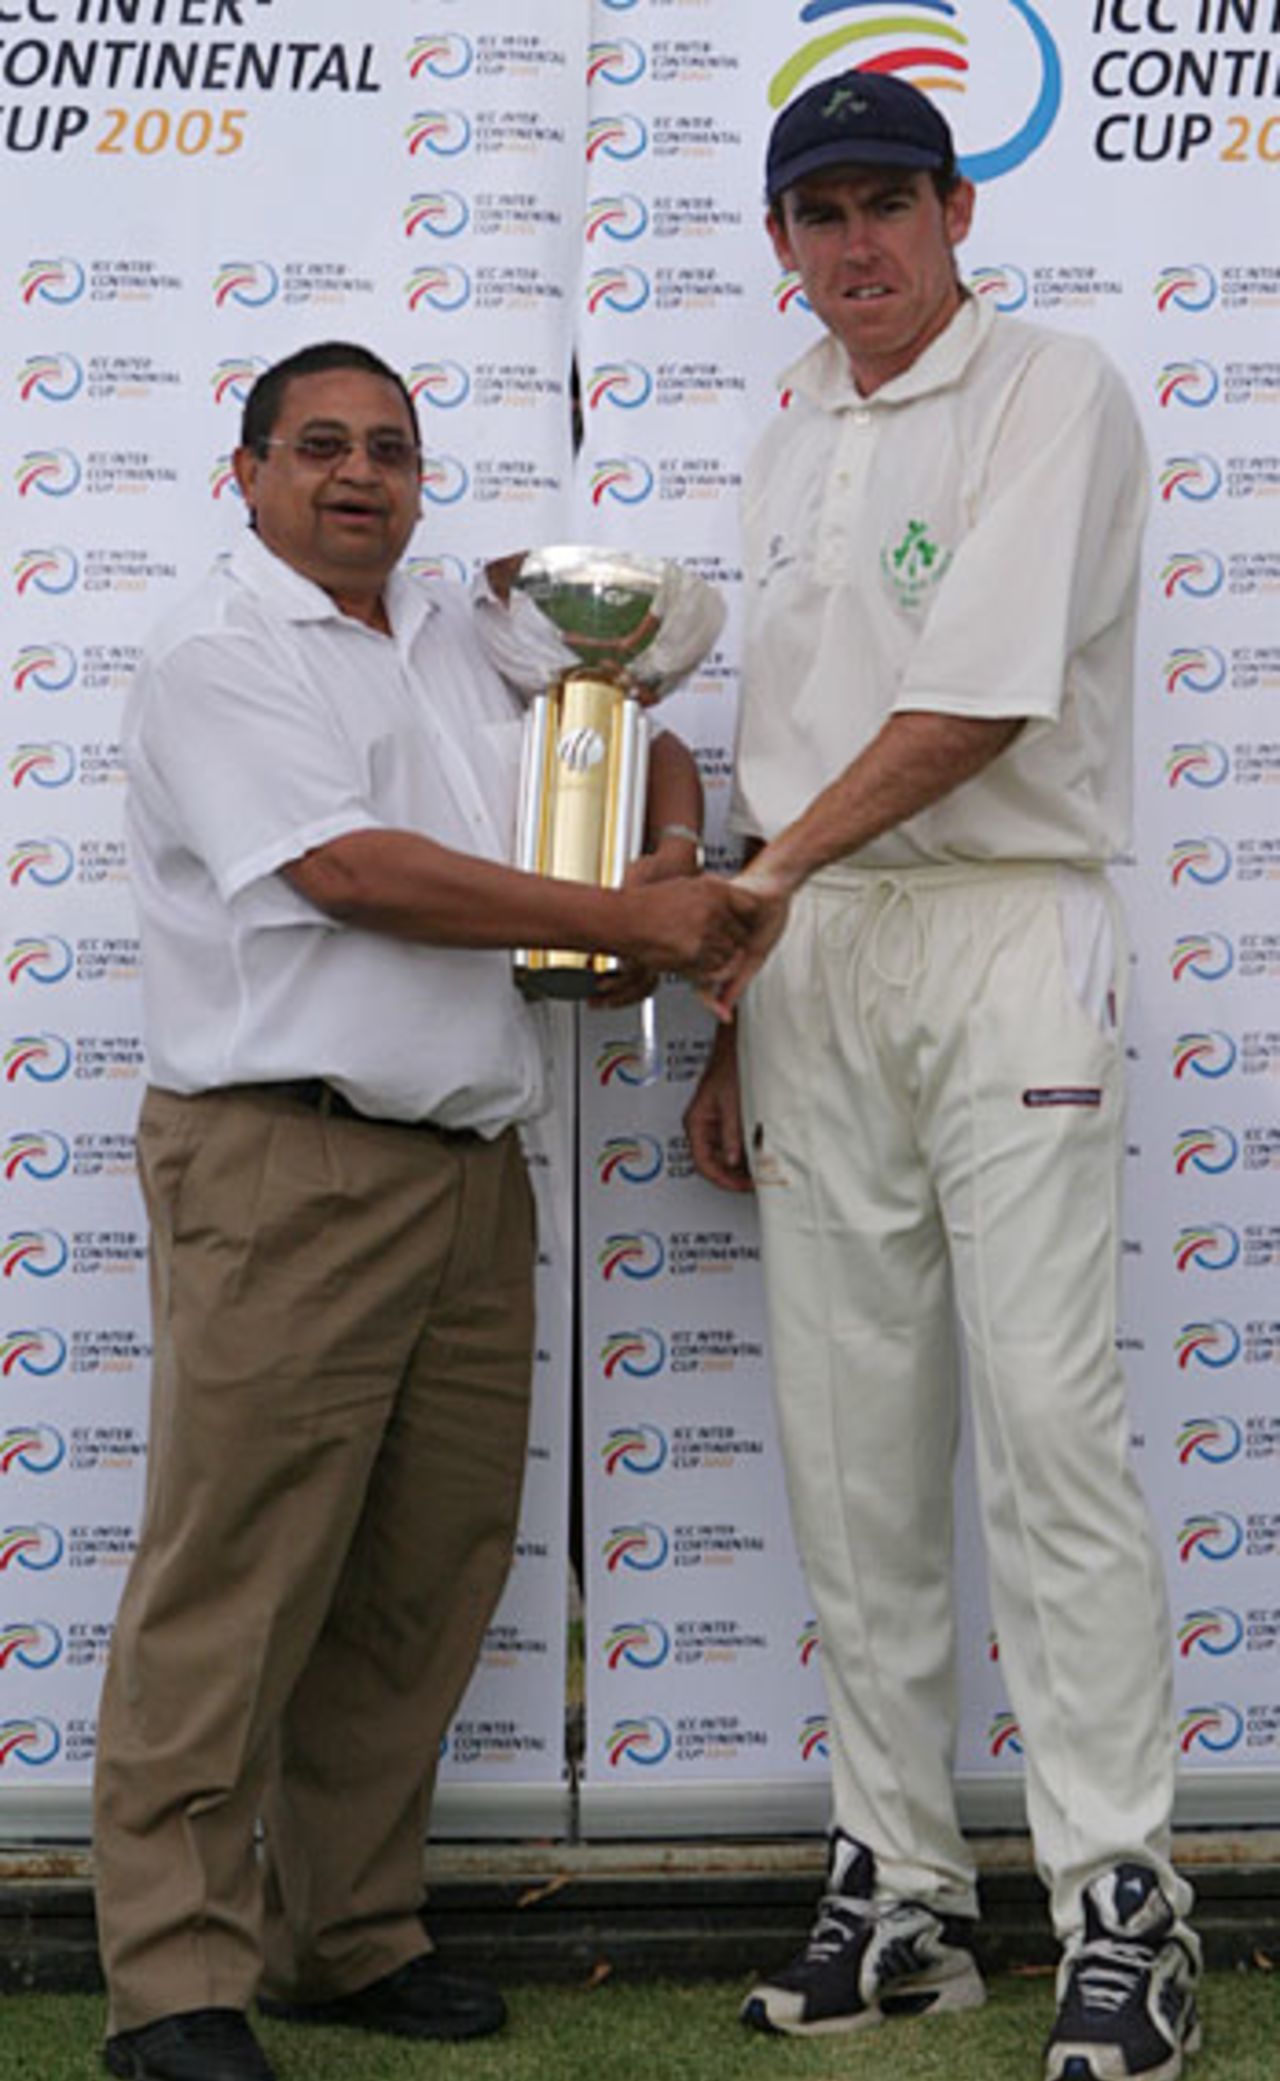 Trent Johnston receives the Intercontinental Cup from Percy Sonn after Ireland's six-wicket win against Kenya, Ireland v Kenya, Intercontinental Cup final, Windhoek, October 29, 2005